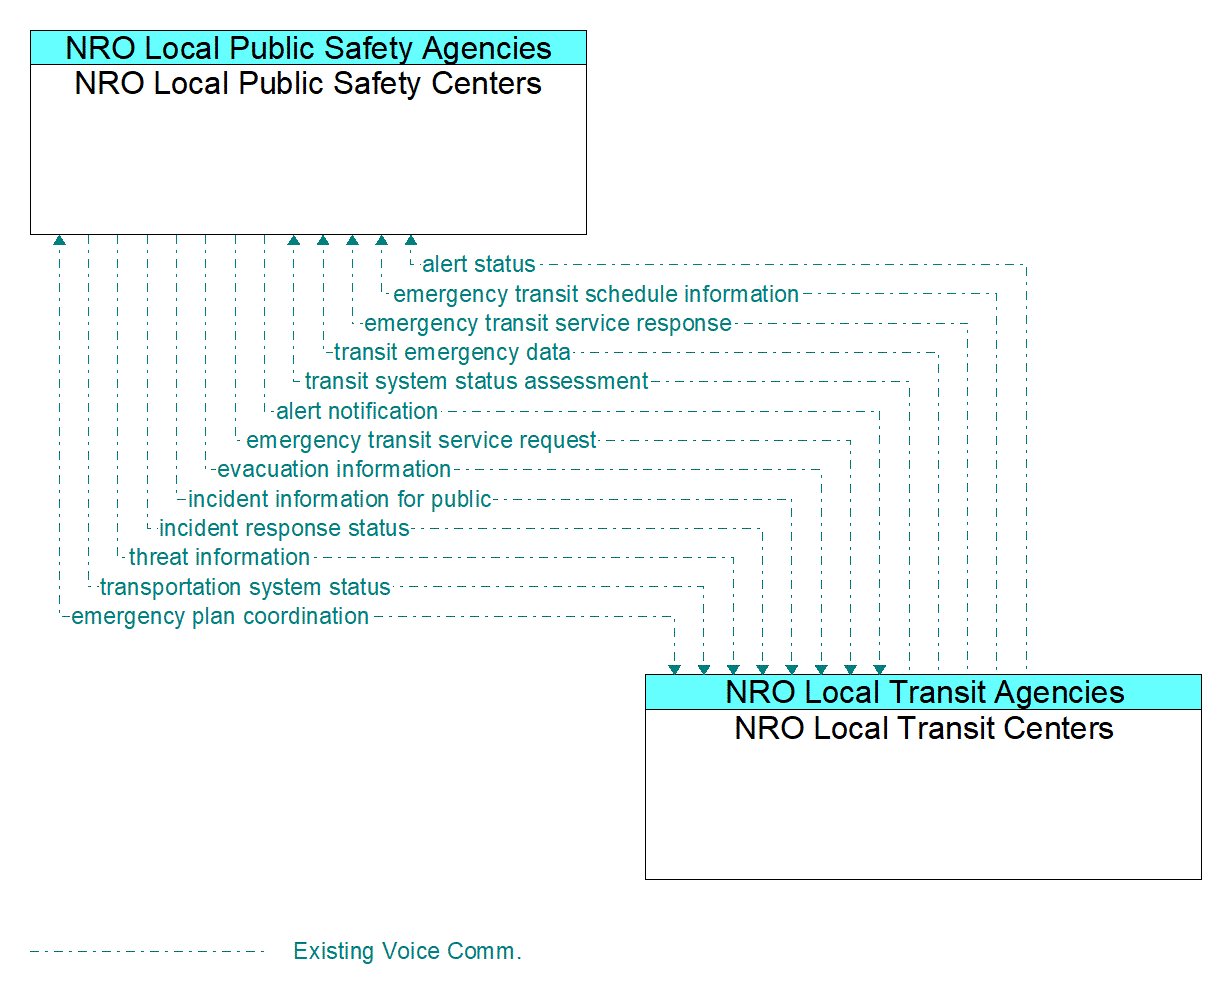 Architecture Flow Diagram: NRO Local Transit Centers <--> NRO Local Public Safety Centers